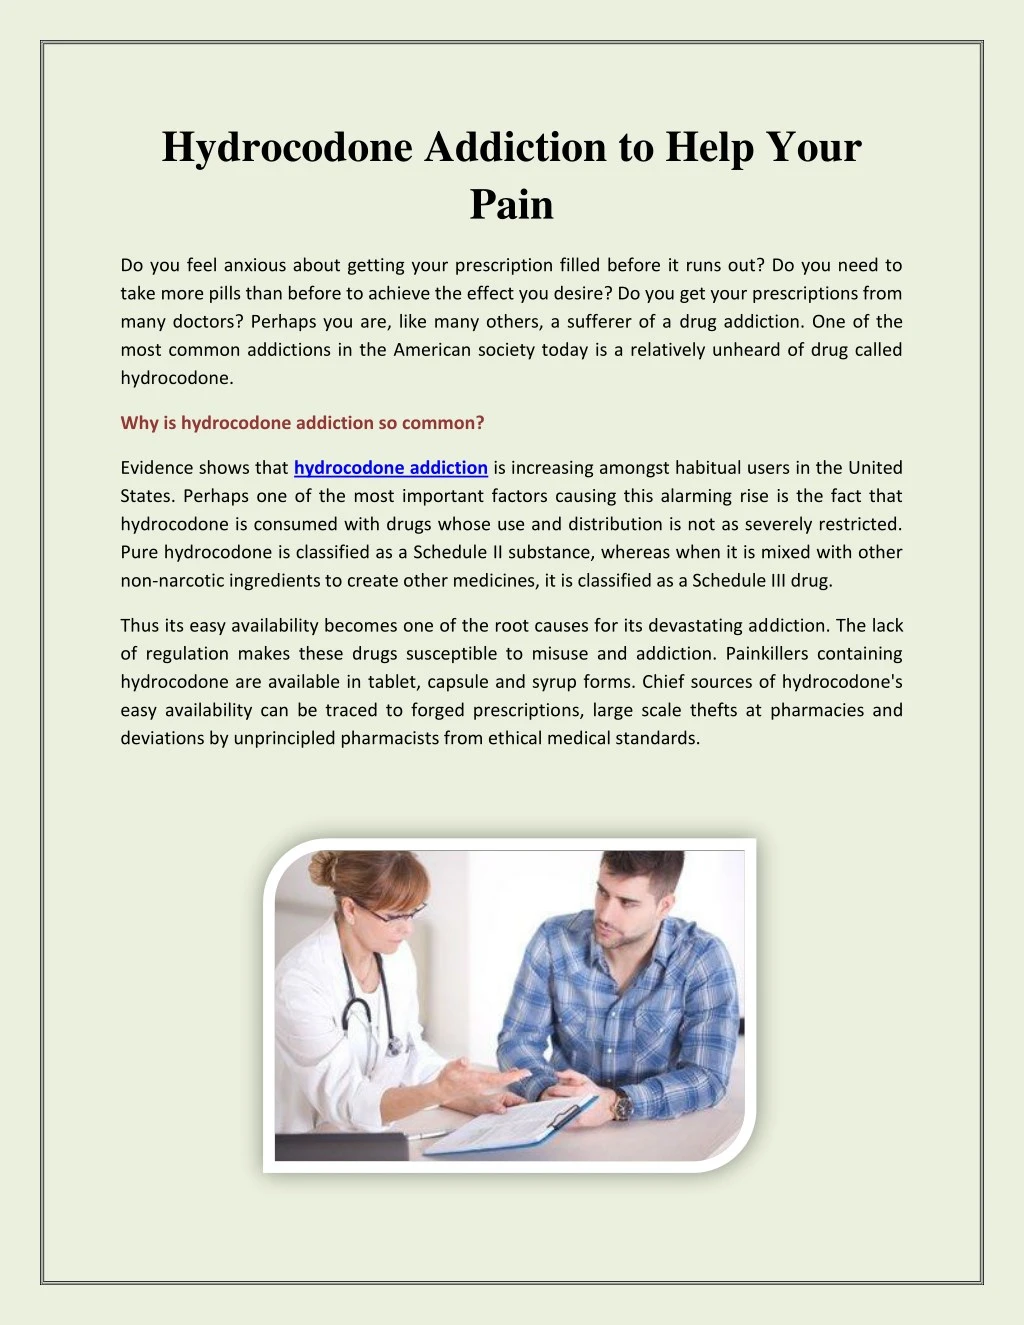 hydrocodone addiction to help your pain